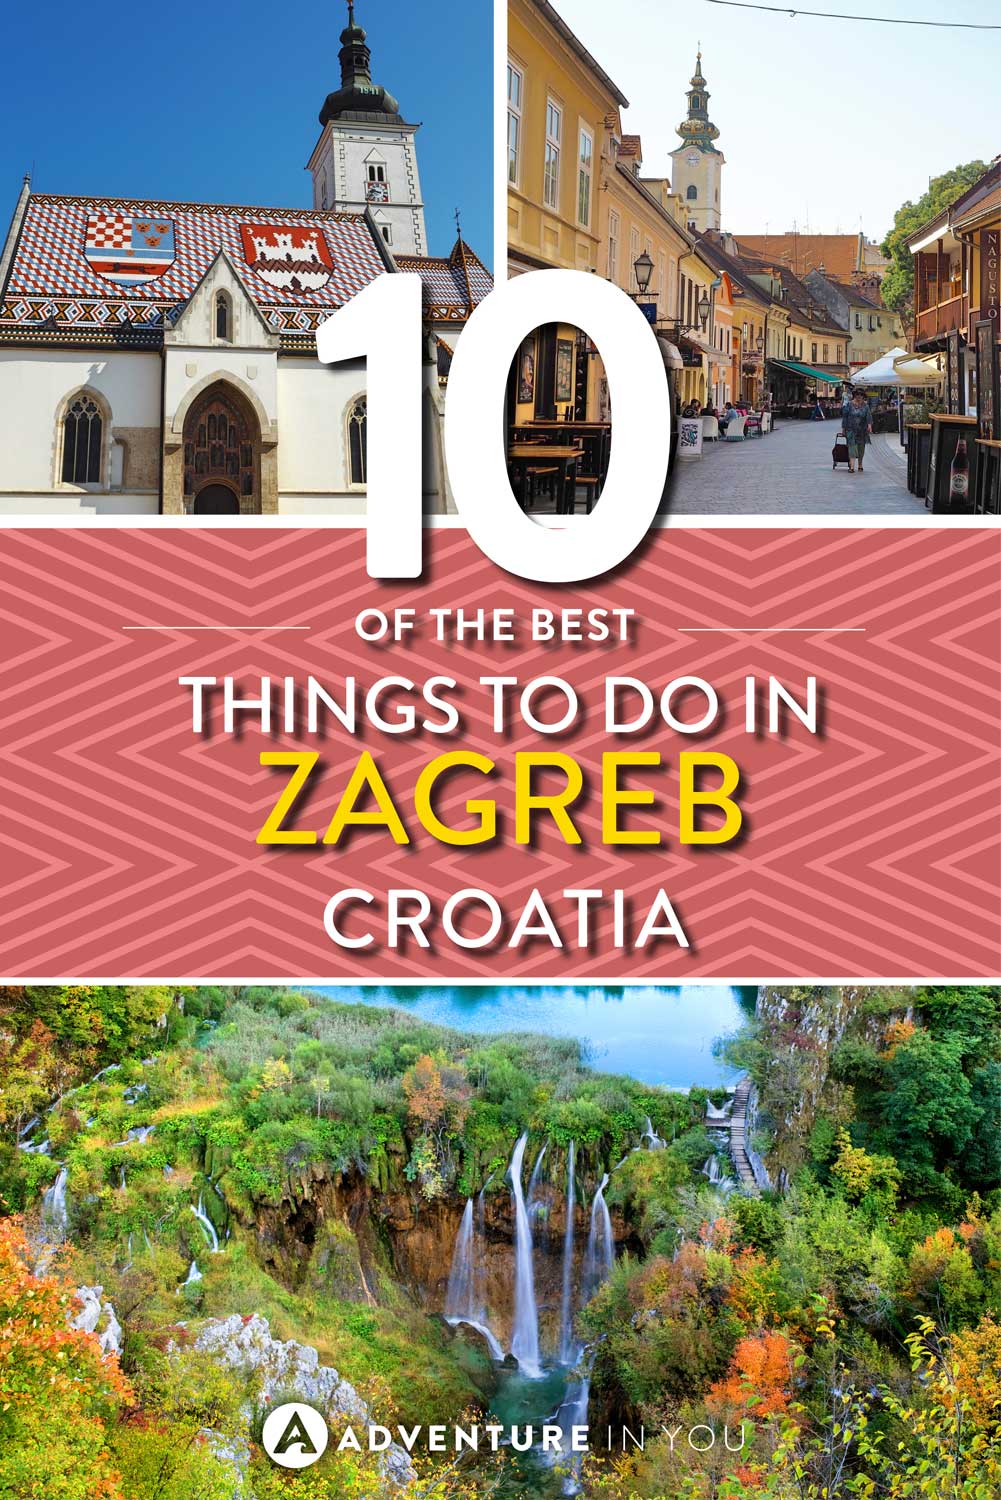 Zagreb Croatia | Looking for the best things to do in Zagreb? This Croatian city is full of fantastic things to do including day trips to the famous Plitvice Lakes National Park.